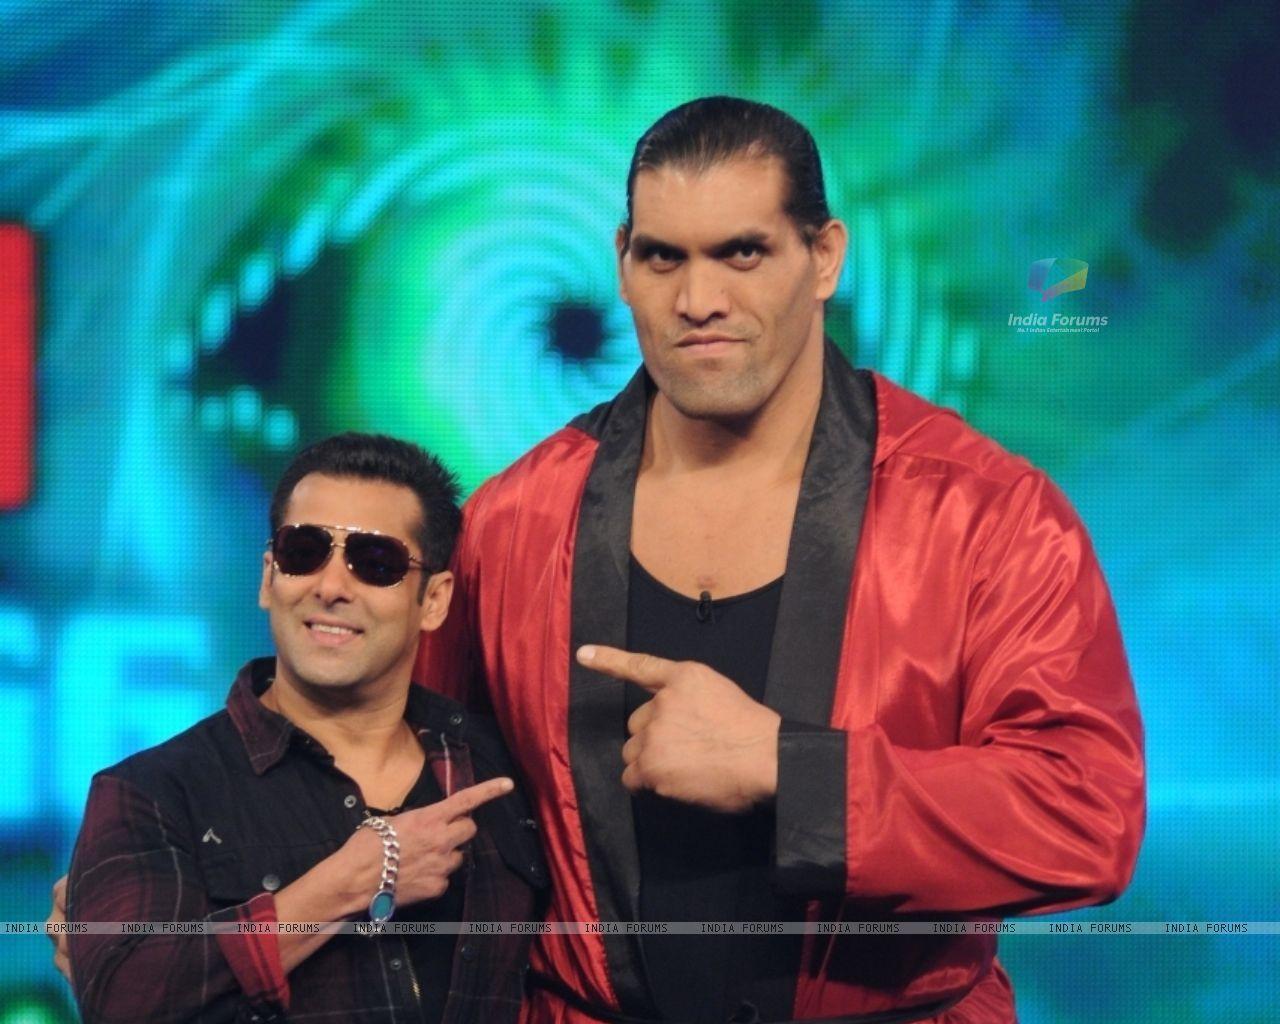 Wallpaper with WWE Superstar The Great Khali 102370